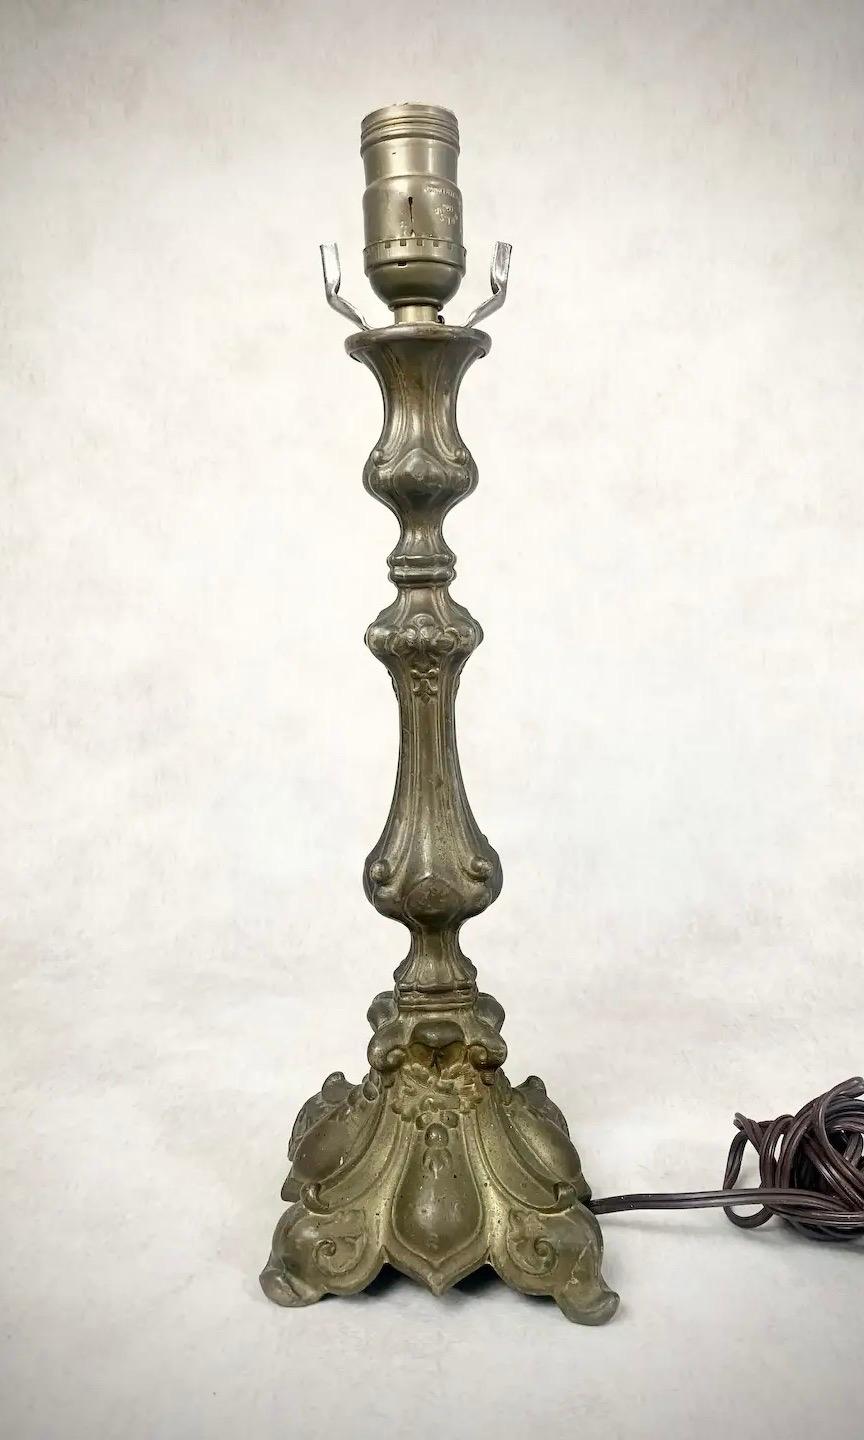 19th Century Brass Candlestick Table Lamp  In Good Condition For Sale In Middletown, MD